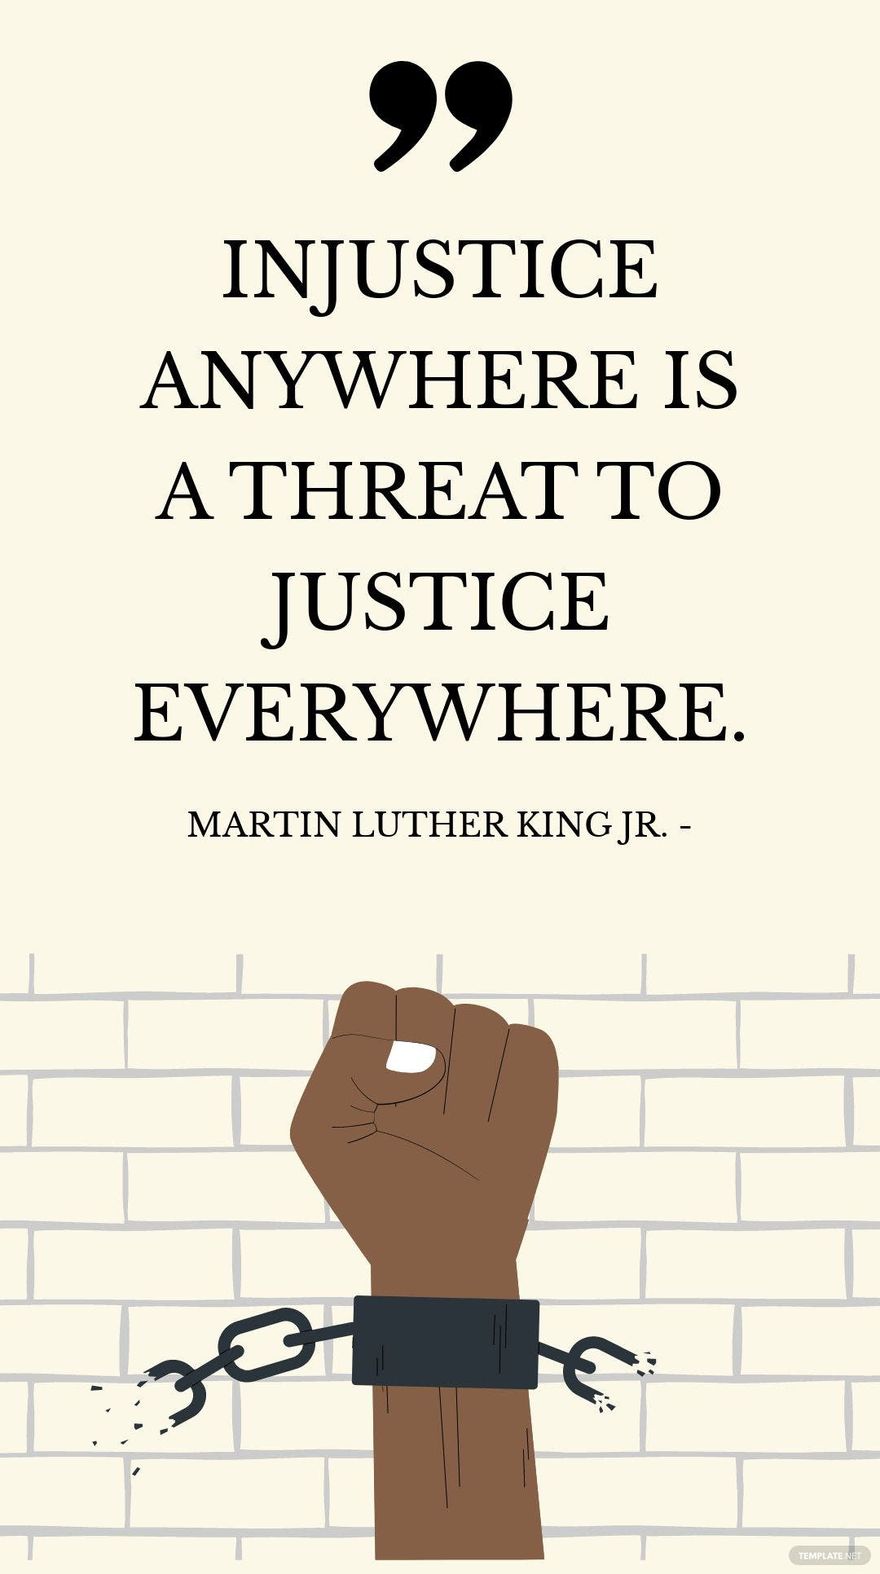 Martin Luther King Jr. - Injustice anywhere is a threat to justice everywhere. in JPG